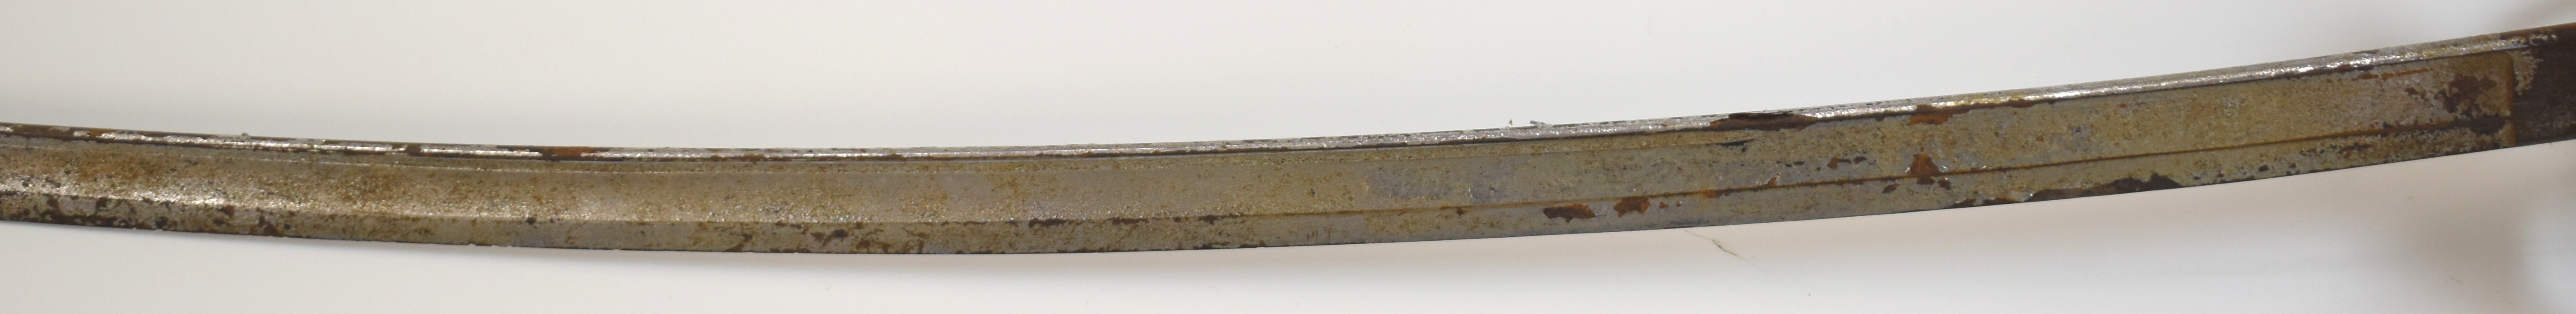 American Civil War sword with wooden grip, two bar hilt, US 1864 AGM to ricasso and Crosby - Image 25 of 26